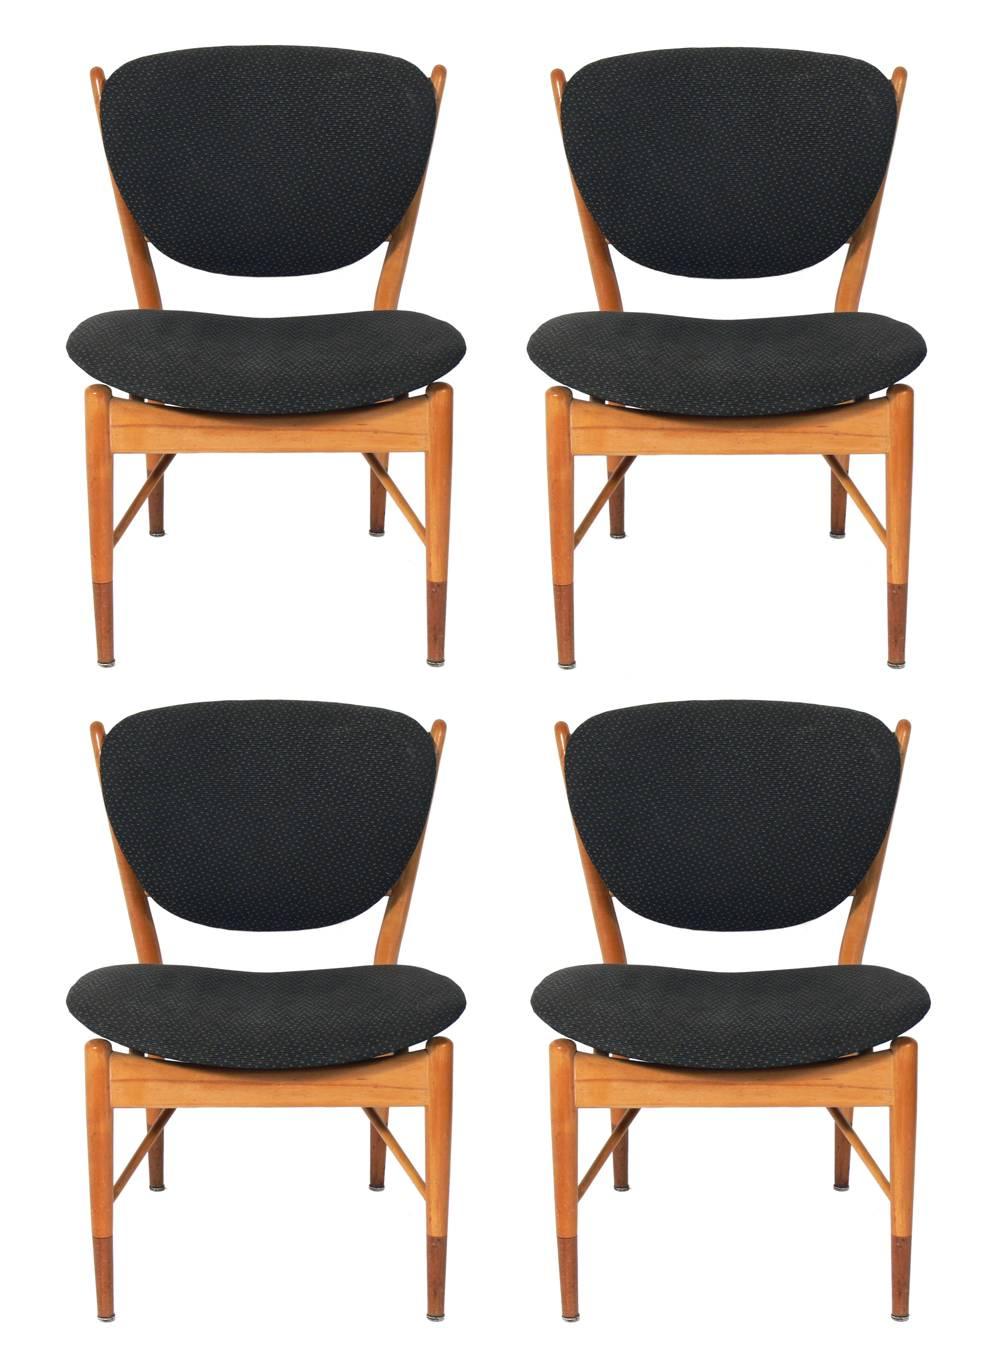 Danish modern dining table and four dining chairs, designed by Finn Juhl for Baker, circa 1950s. Signed with Baker tag underneath. Very sculptural chairs and beautifully inlaid table. The table expands to an impressive length to fit up to ten